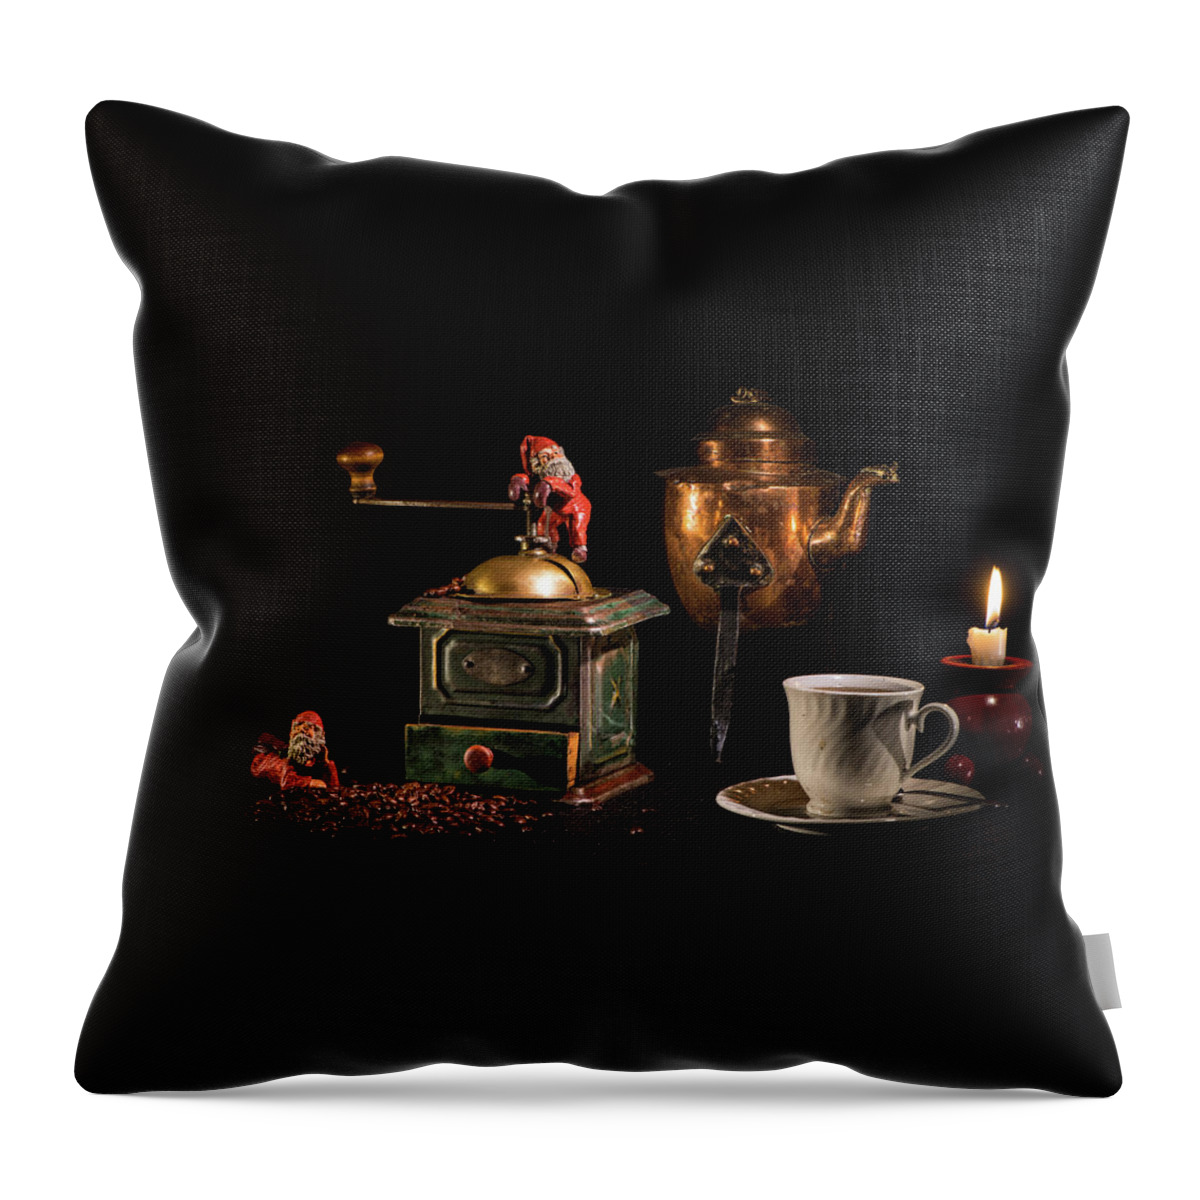 Candlelight Throw Pillow featuring the photograph Christmas Coffee-time by Torbjorn Swenelius